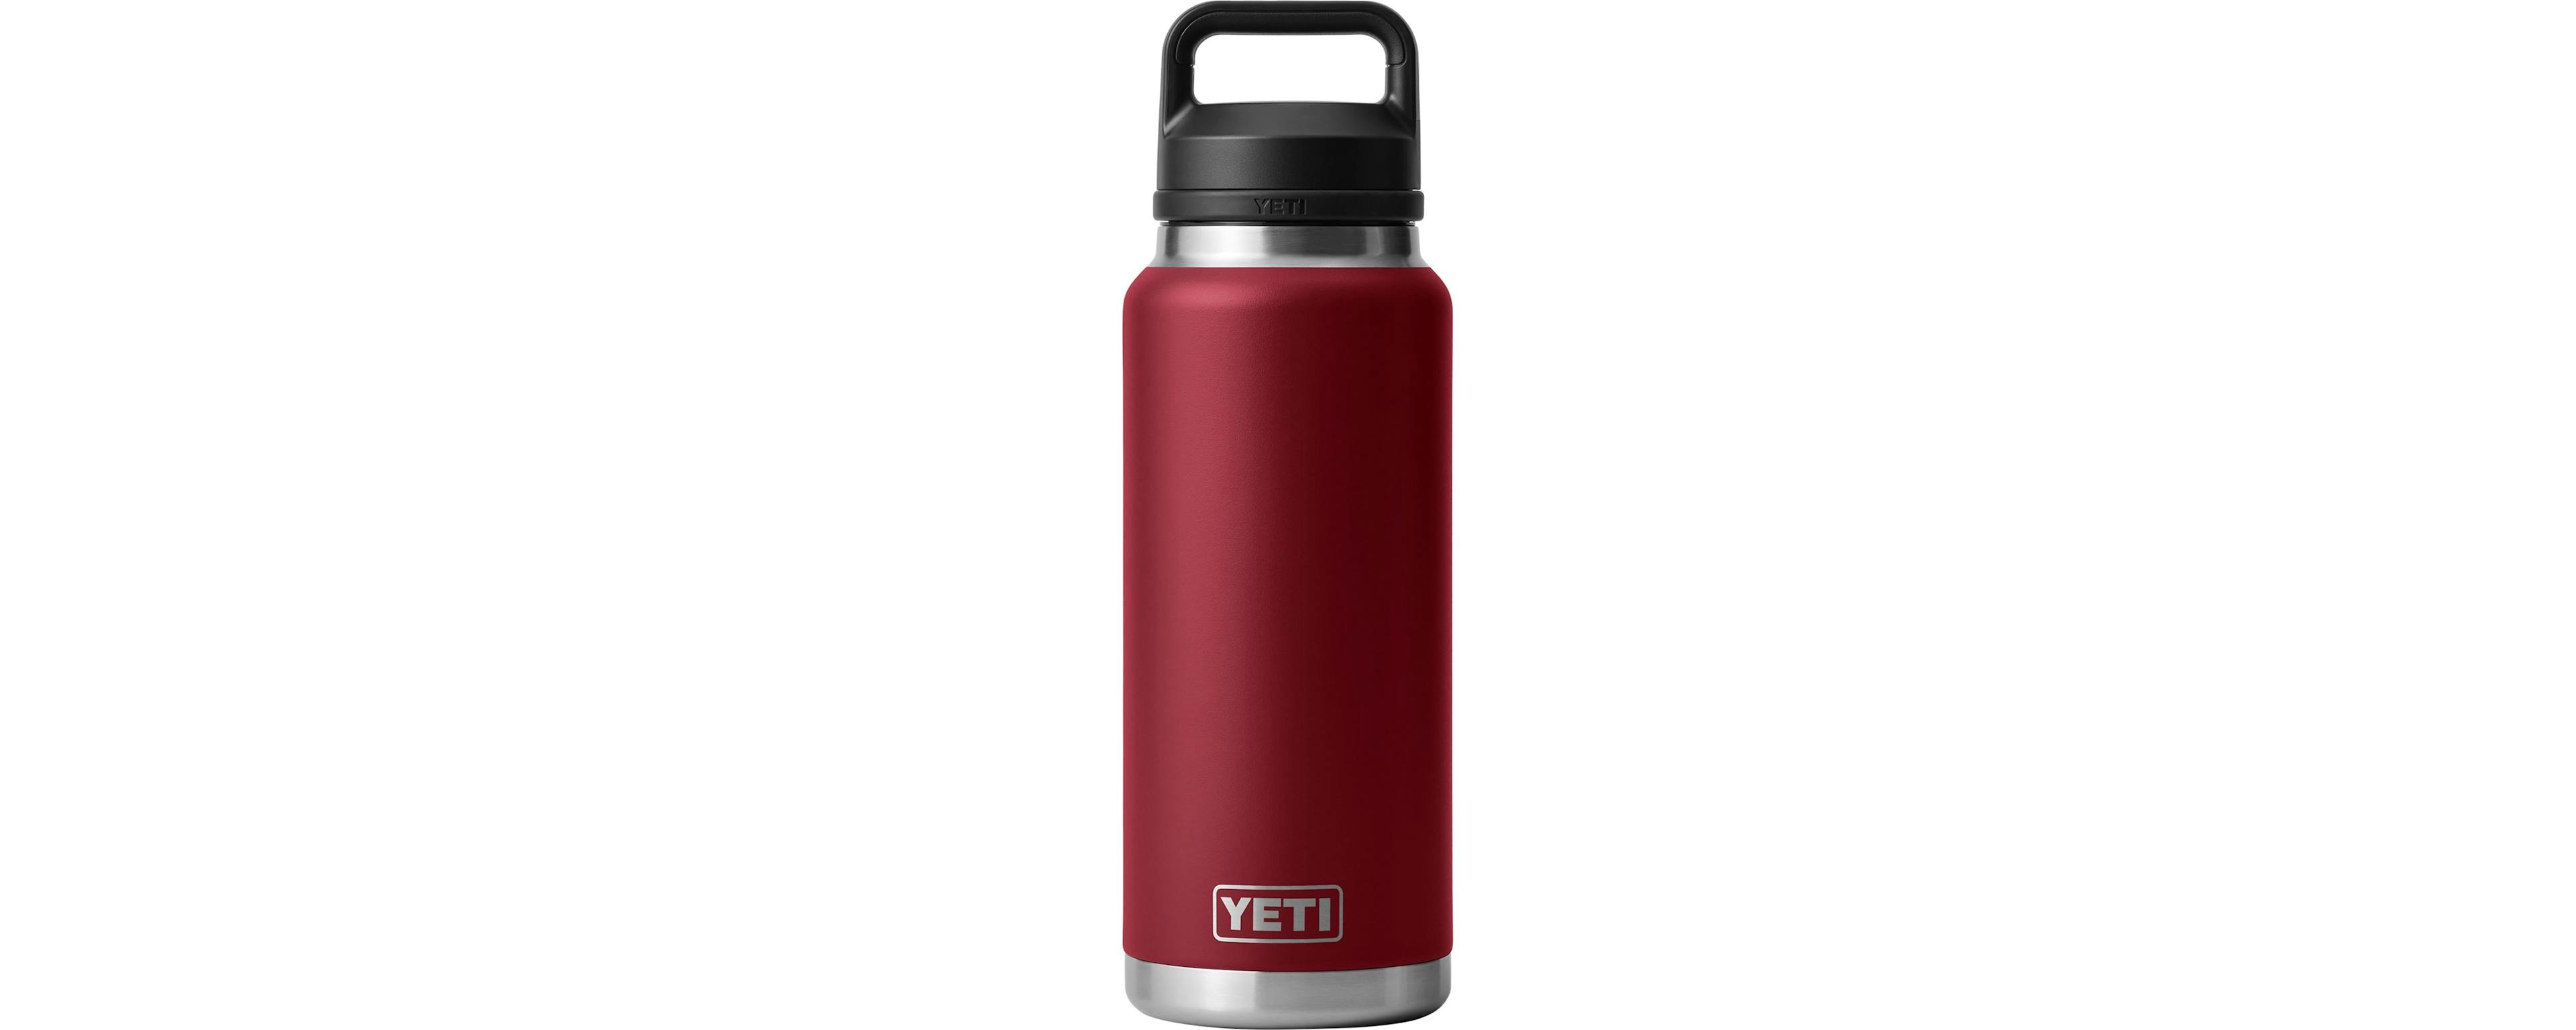 Red colour stainless steel water bottle from Yeti